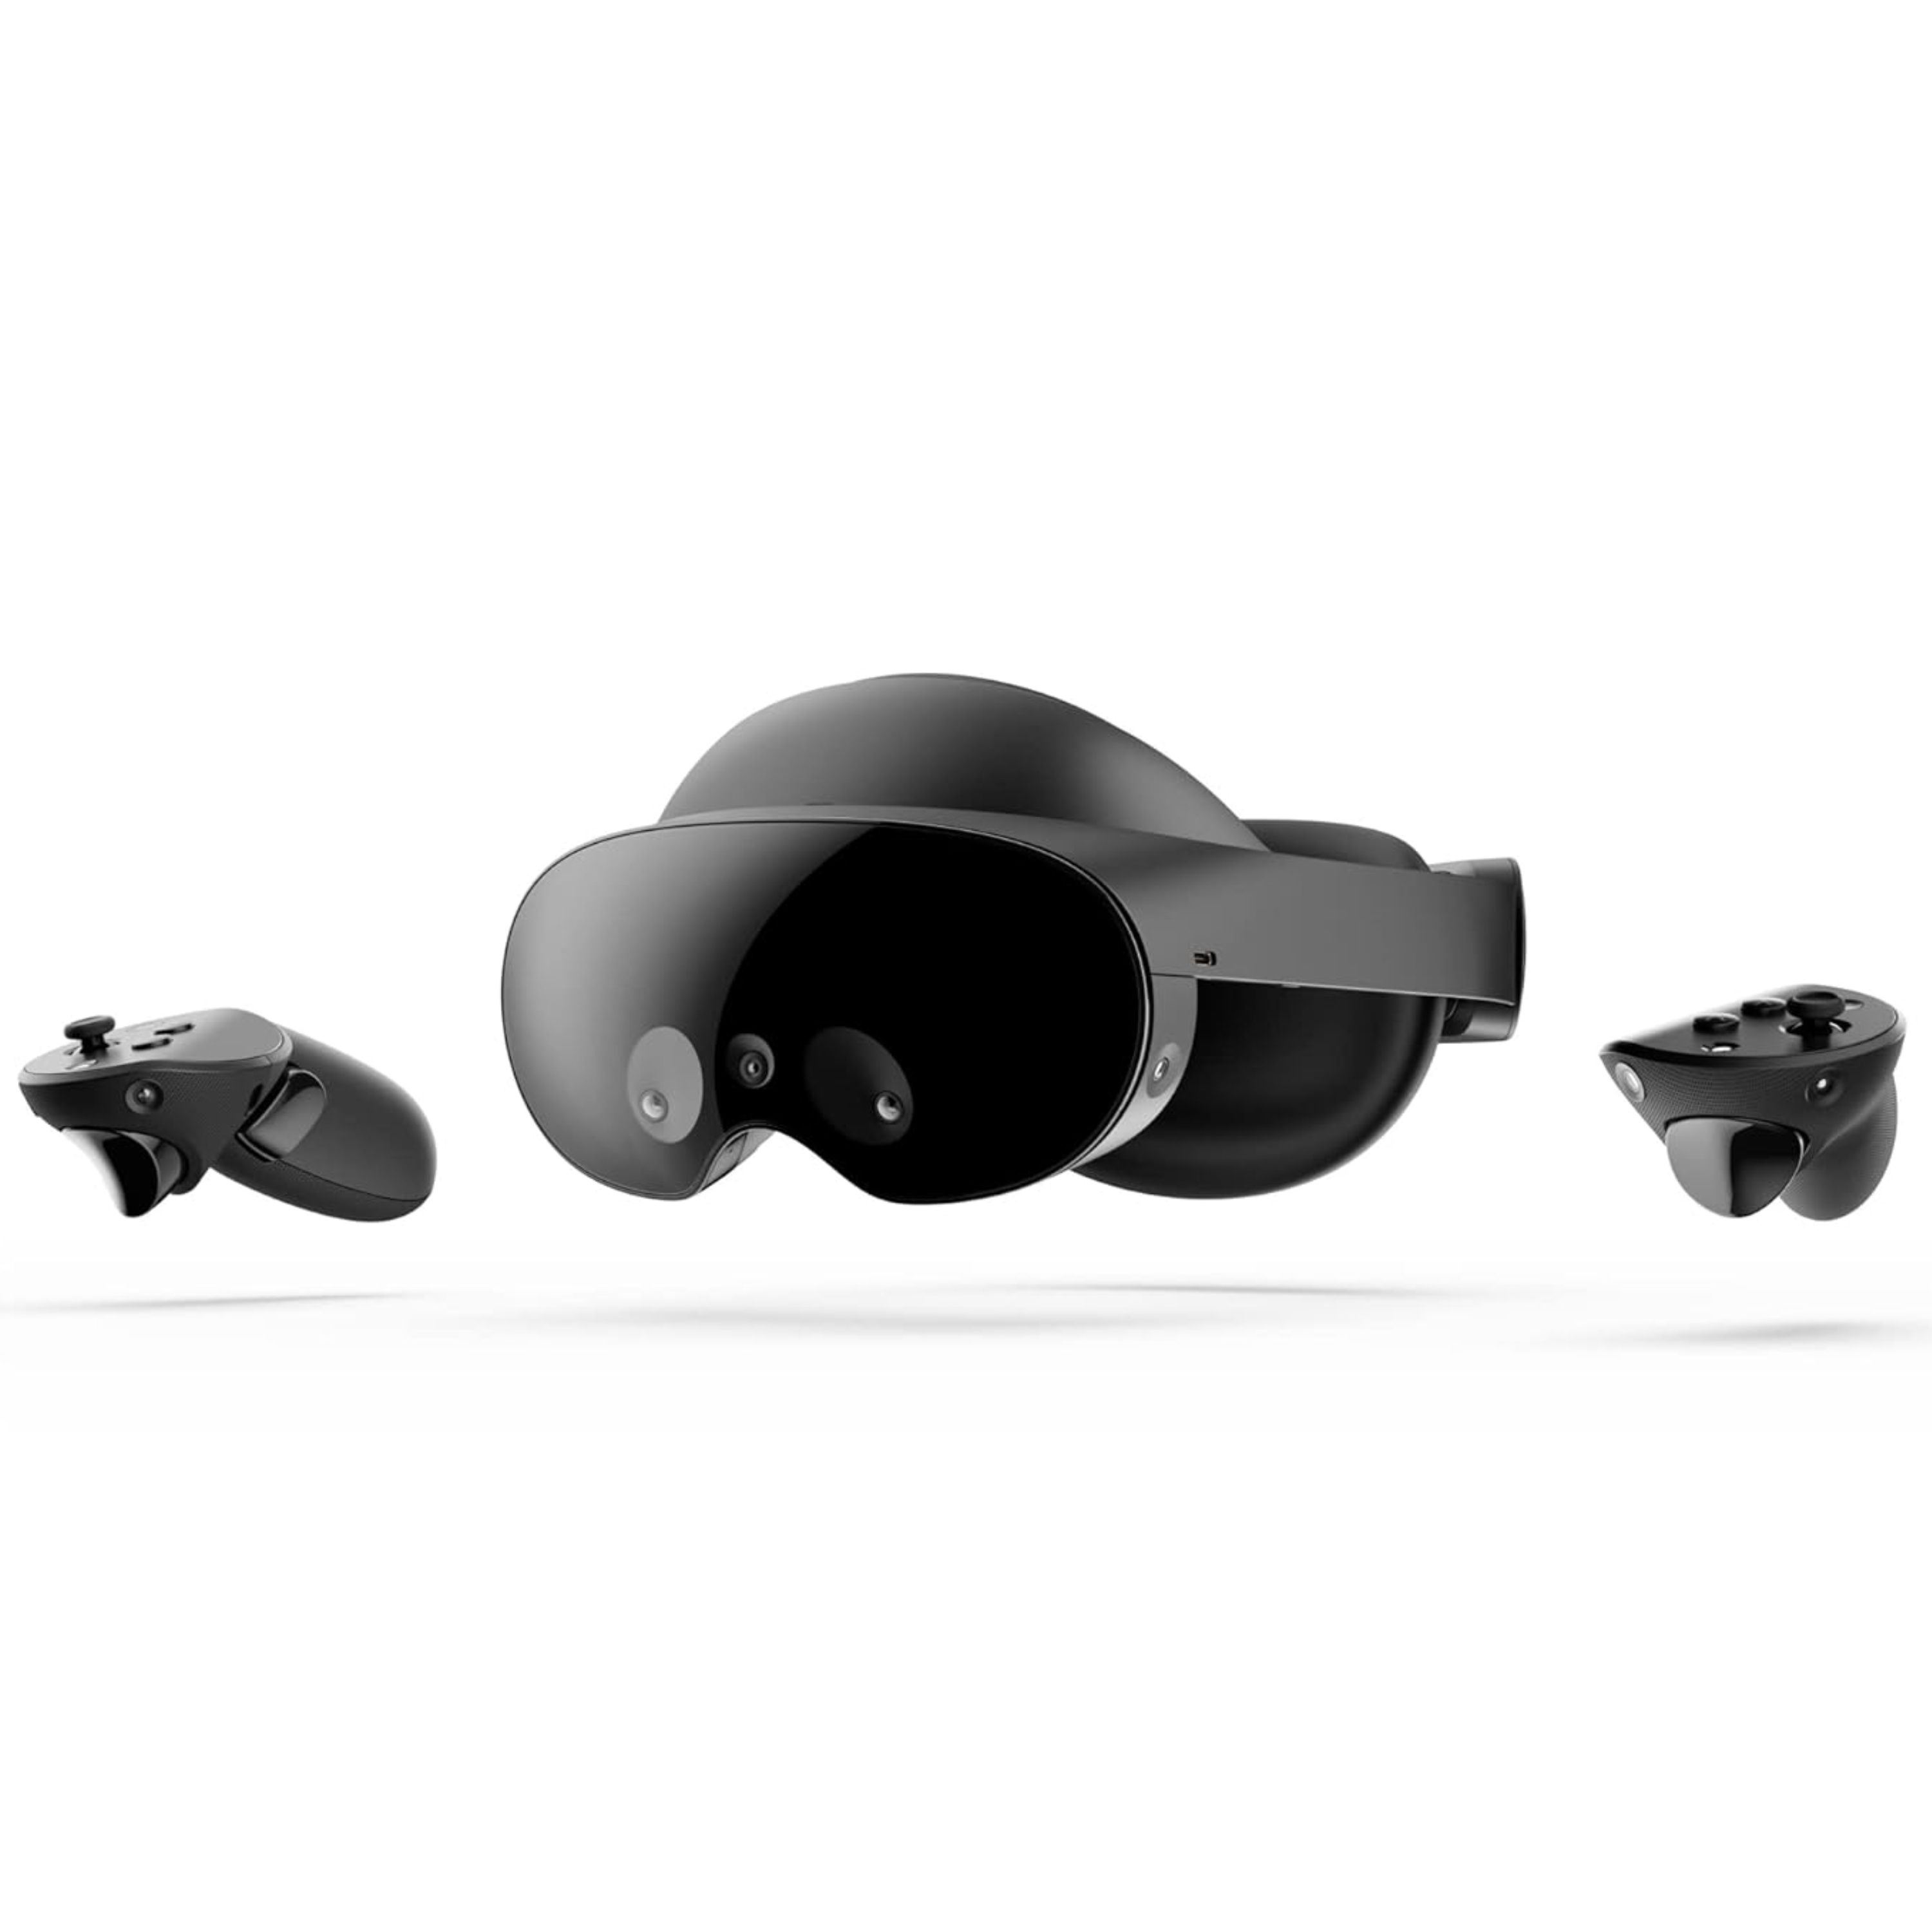 The Meta Quest 3 is a $499 mixed reality headset with full-color passthrough